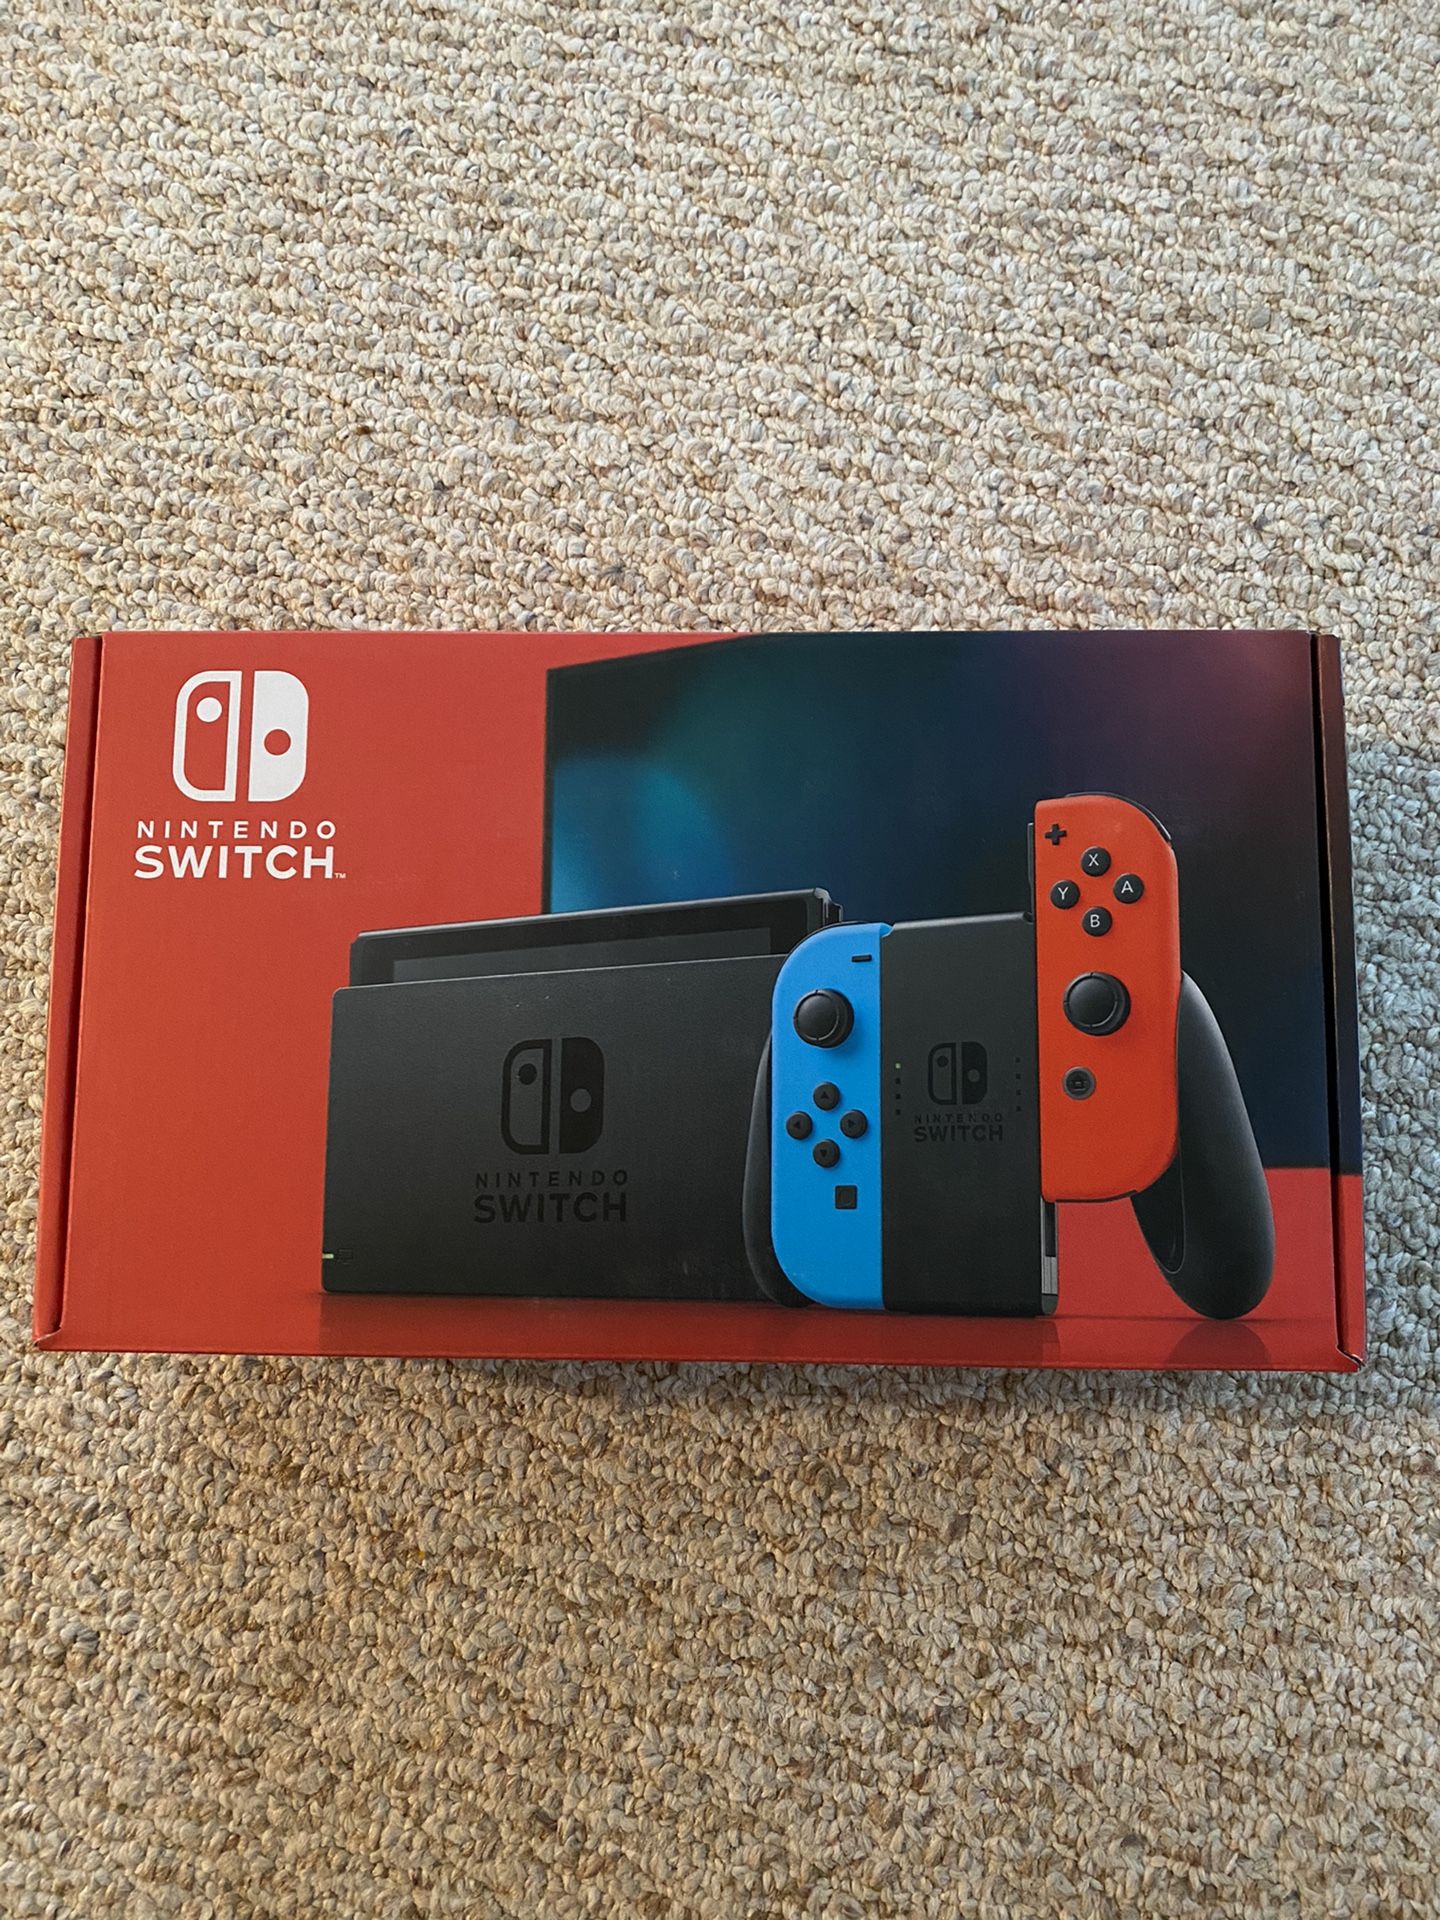 Brand New Nintendo Switch v2 console ... with red and blue controllers. Never opened